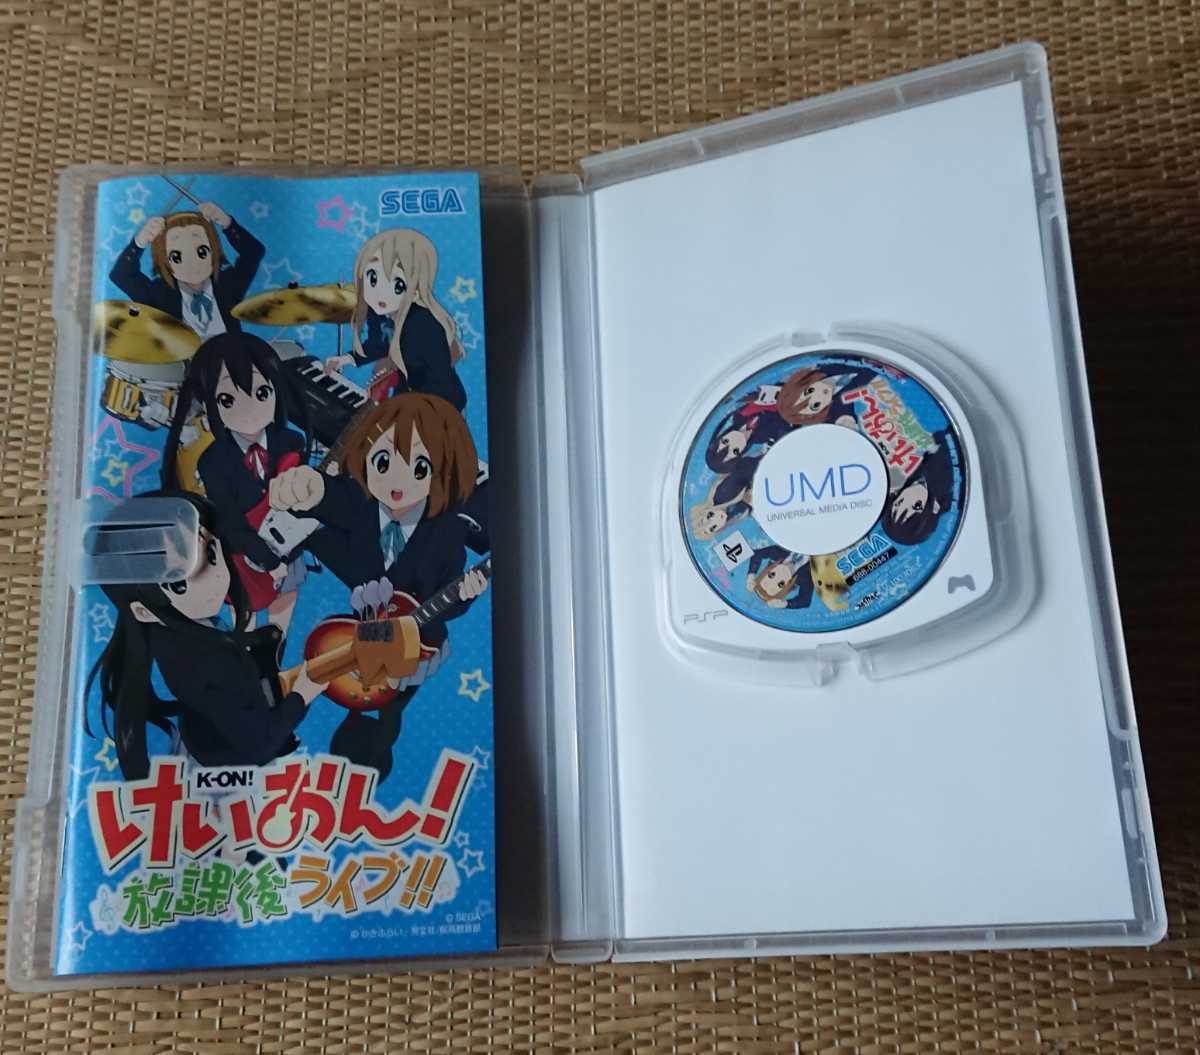 Psp けいおん 放課後ライブ Best版 Product Details Yahoo Auctions Japan Proxy Bidding And Shopping Service From Japan